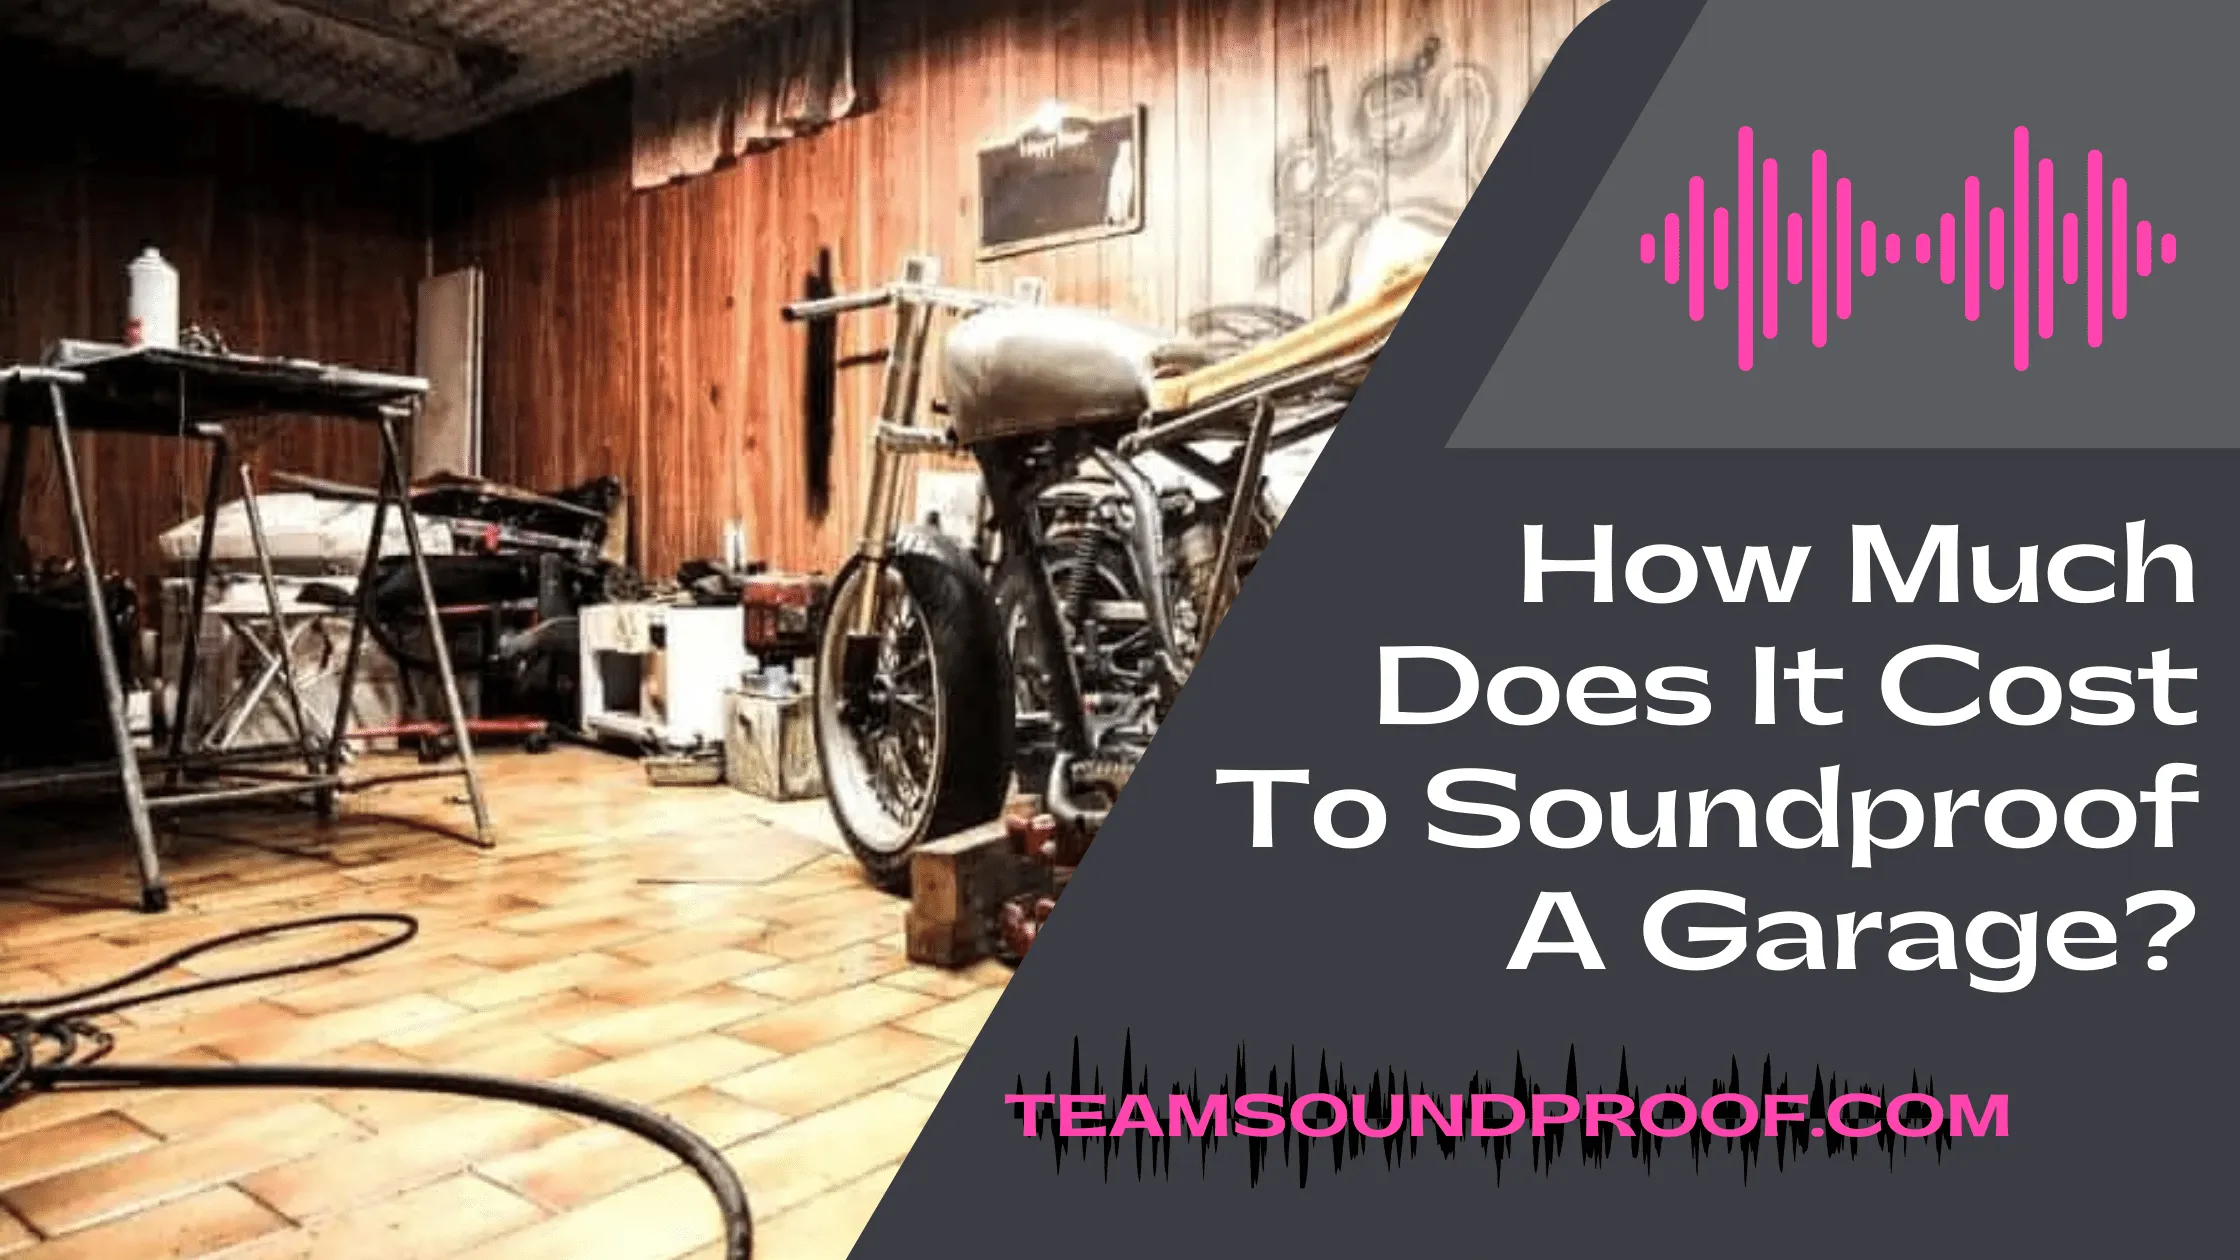 How Much Does It Cost To Soundproof A Garage? - #1 Guide